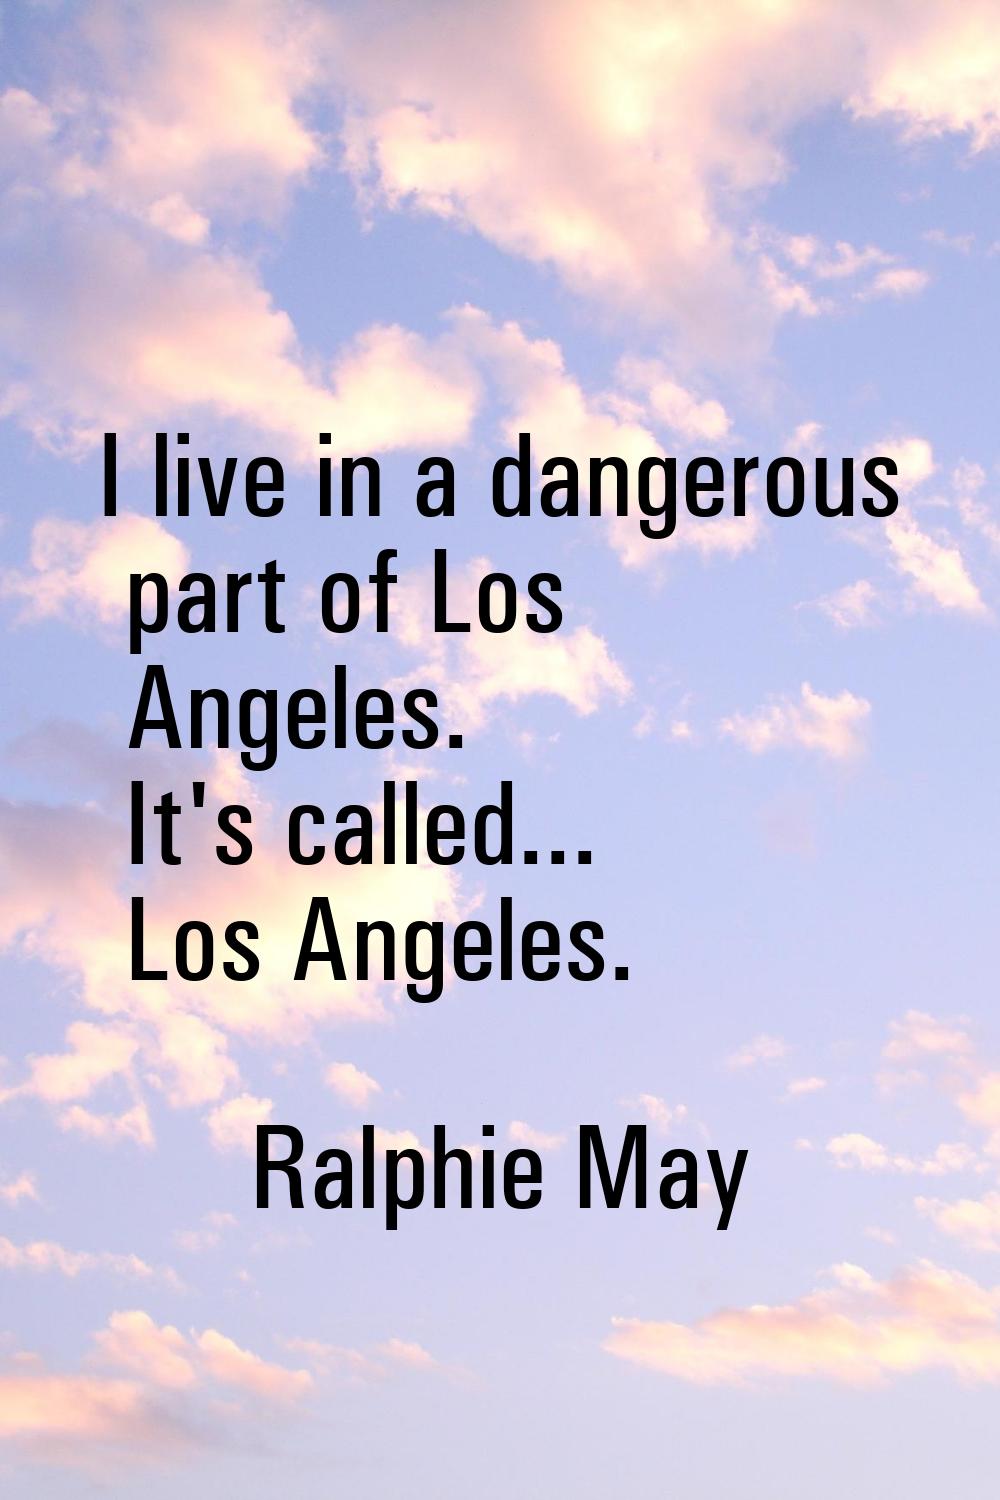 I live in a dangerous part of Los Angeles. It's called... Los Angeles.